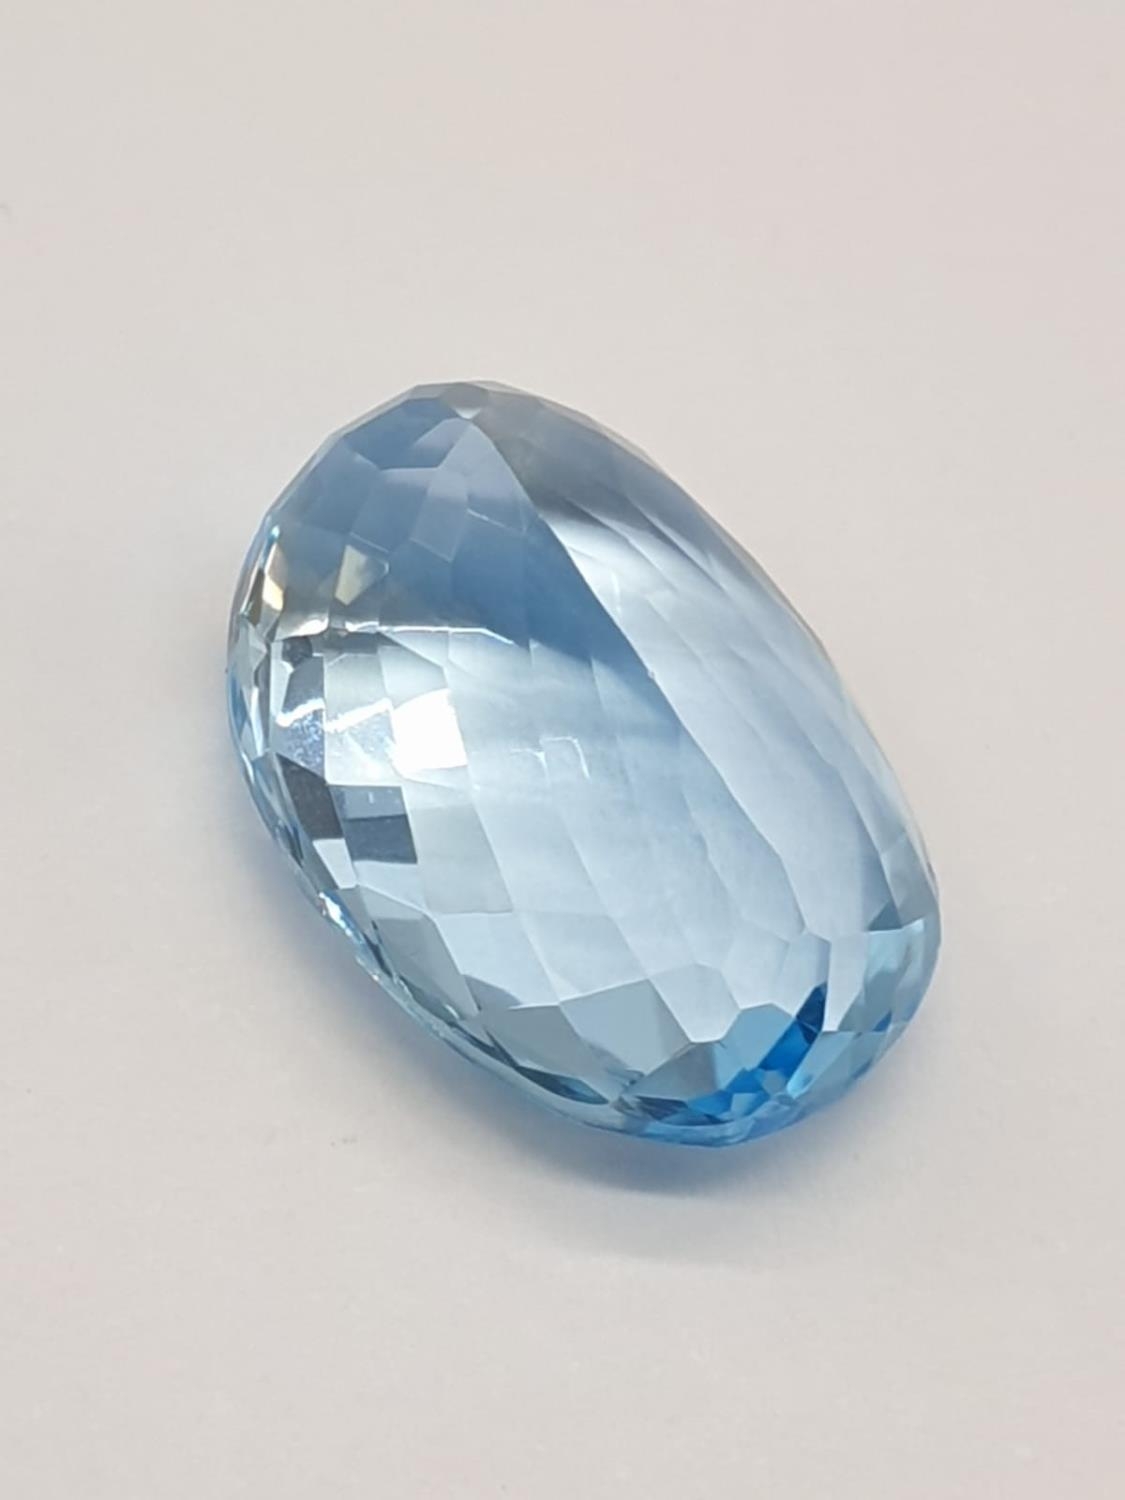 A 17.33 Cts Blue topaz. Oval mixed cut. IDT certification included. - Image 3 of 6